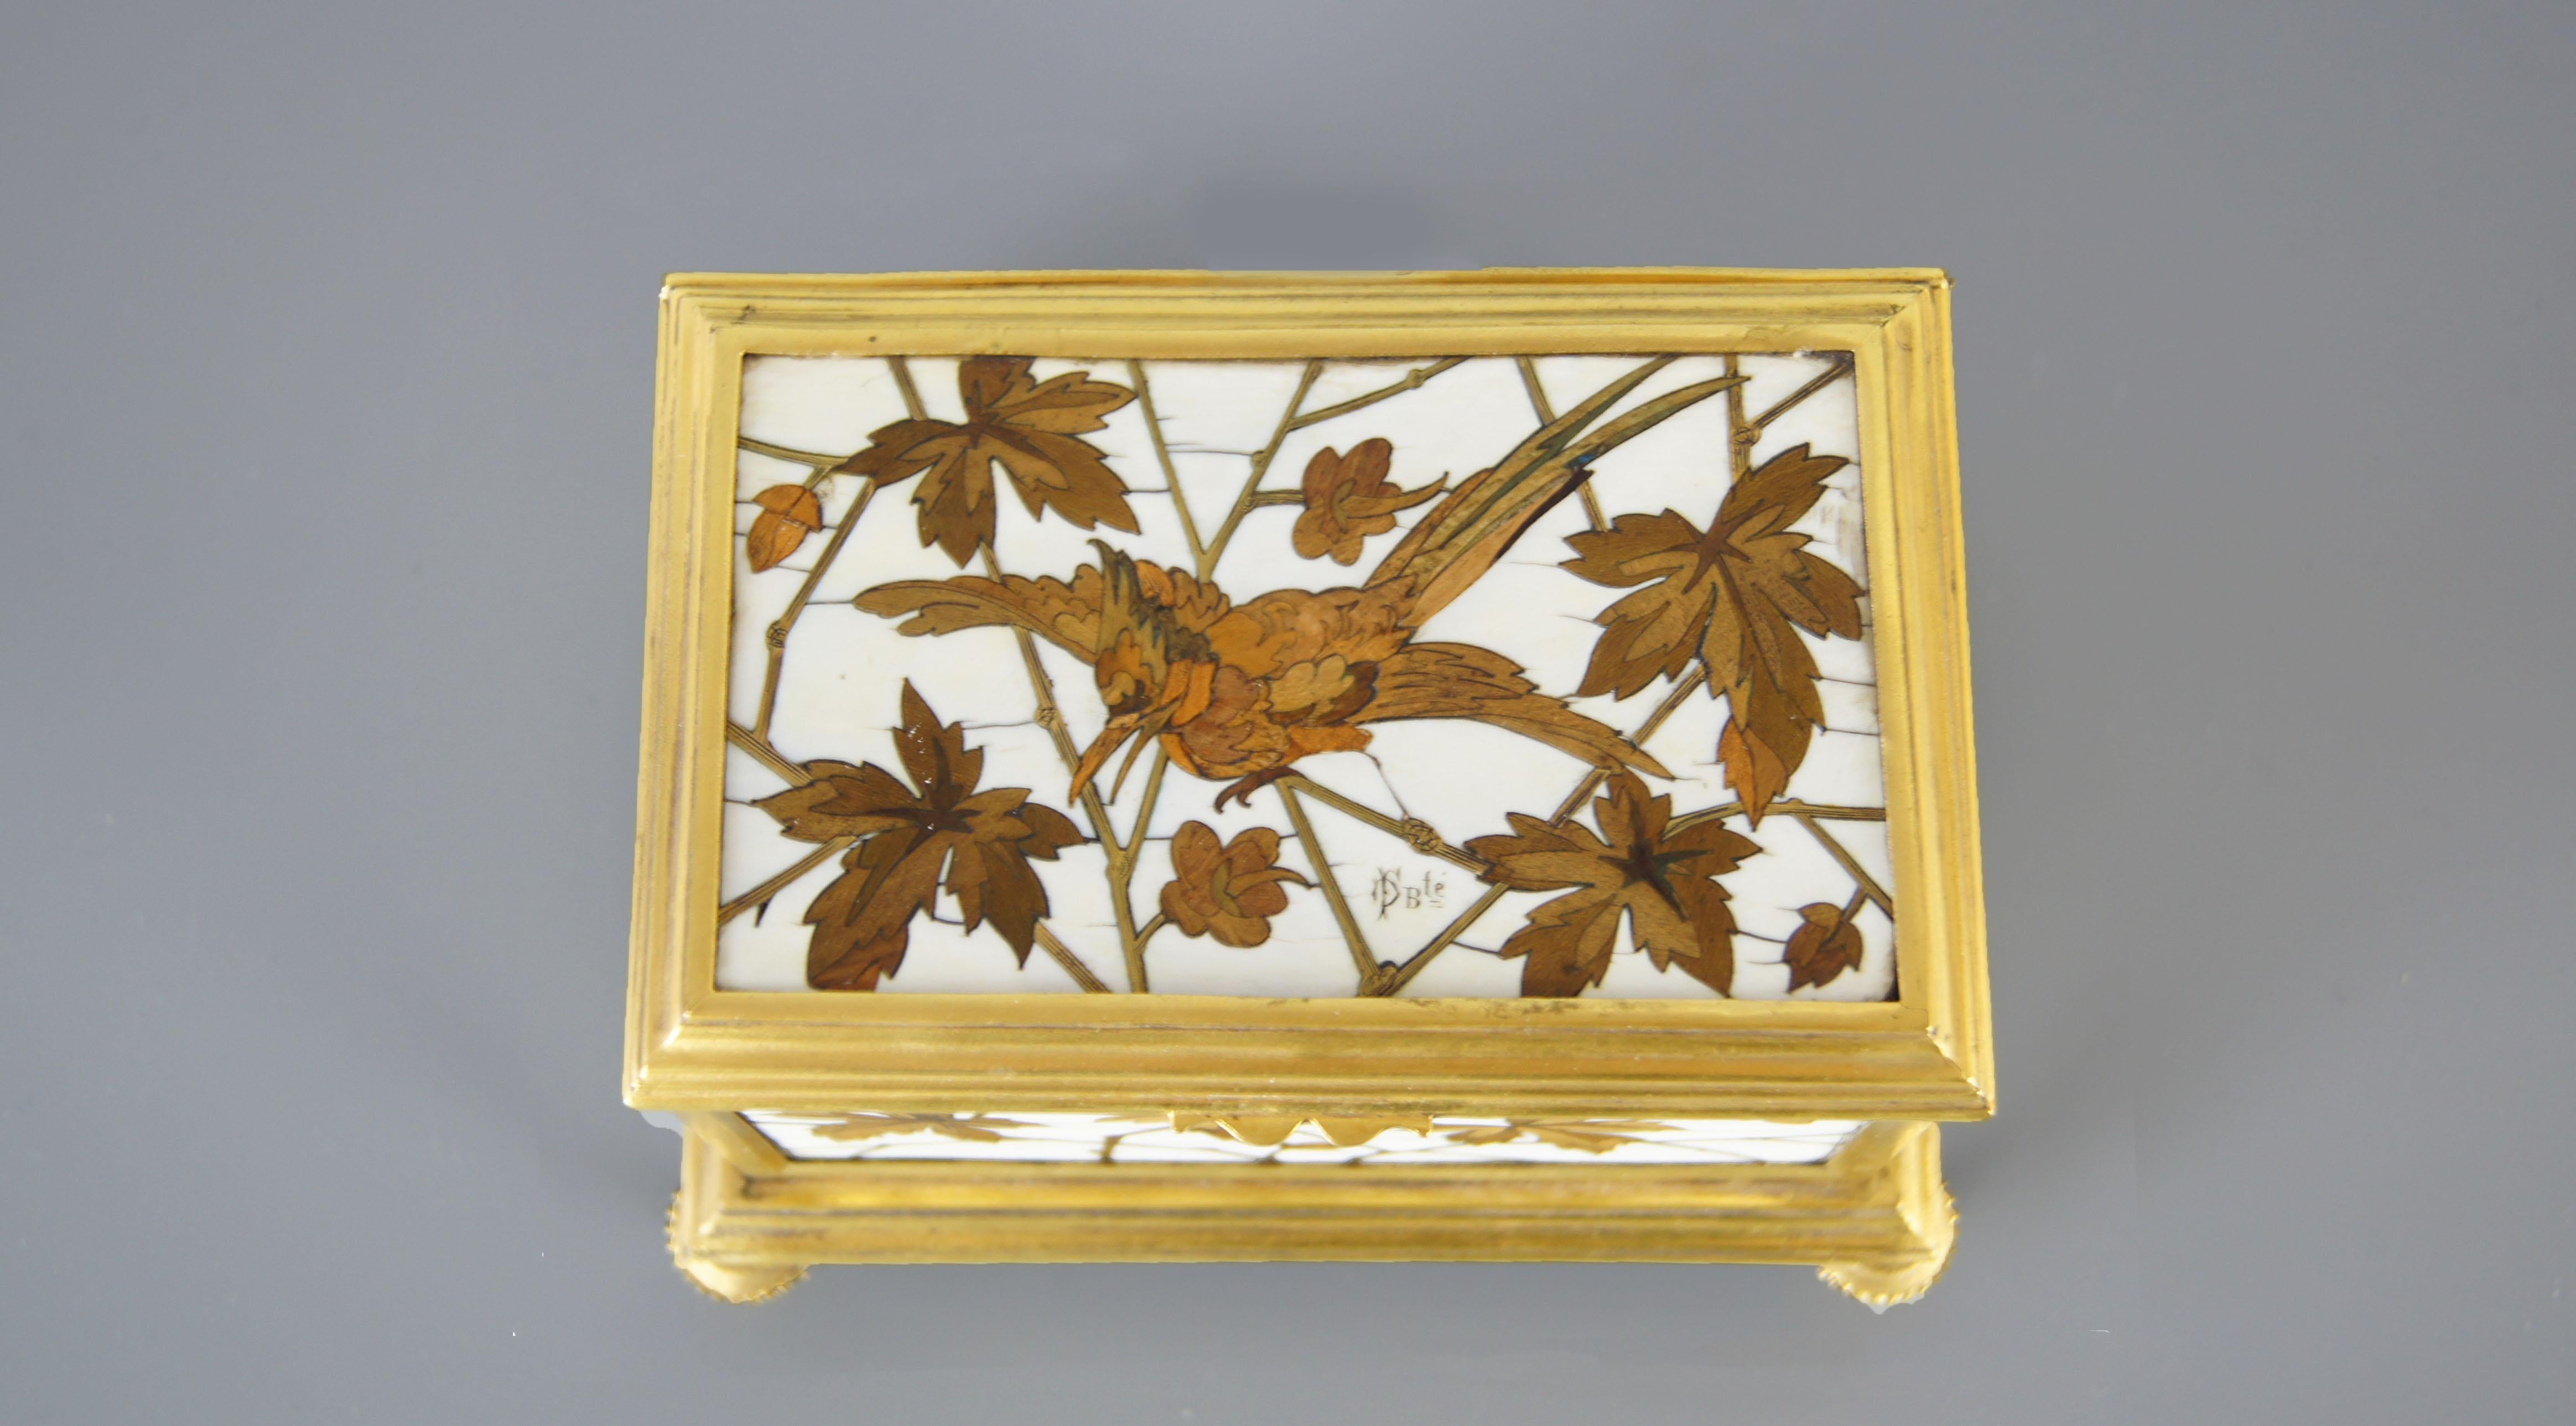 A French gilt-bronze mounted, fruit wood and ivory marquetry metal cloisonné jewellery box by Maison Alphonse Giroux and Ferdinand Duvinage, Paris, circa 1875, rectangular, on four feet, the lid with a bird on a foliate branch, signed.